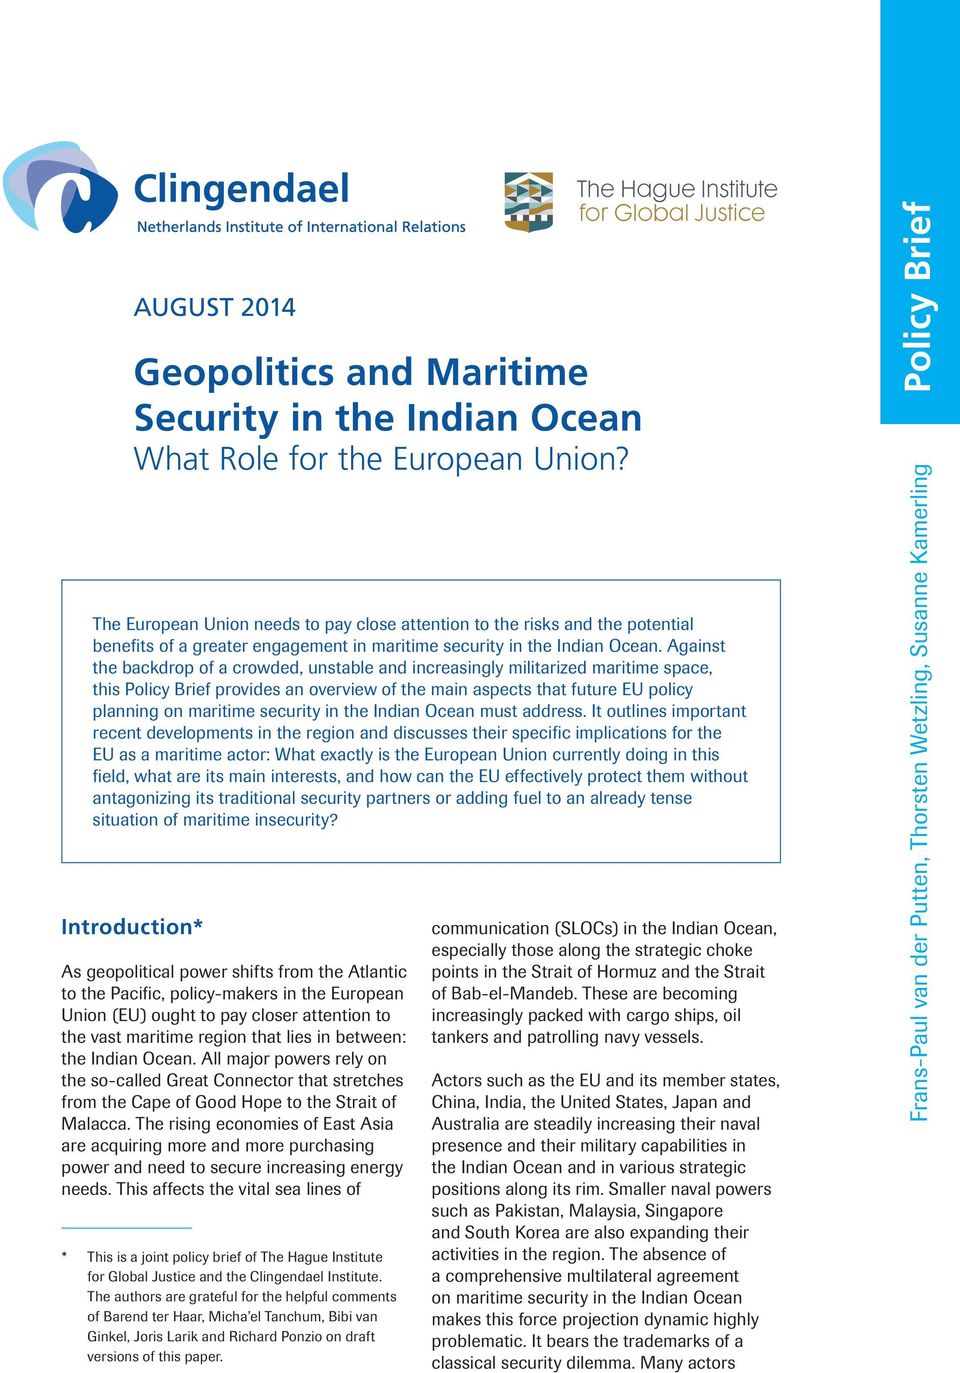 Against the backdrop of a crowded, unstable and increasingly militarized maritime space, this Policy Brief provides an overview of the main aspects that future EU policy planning on maritime security